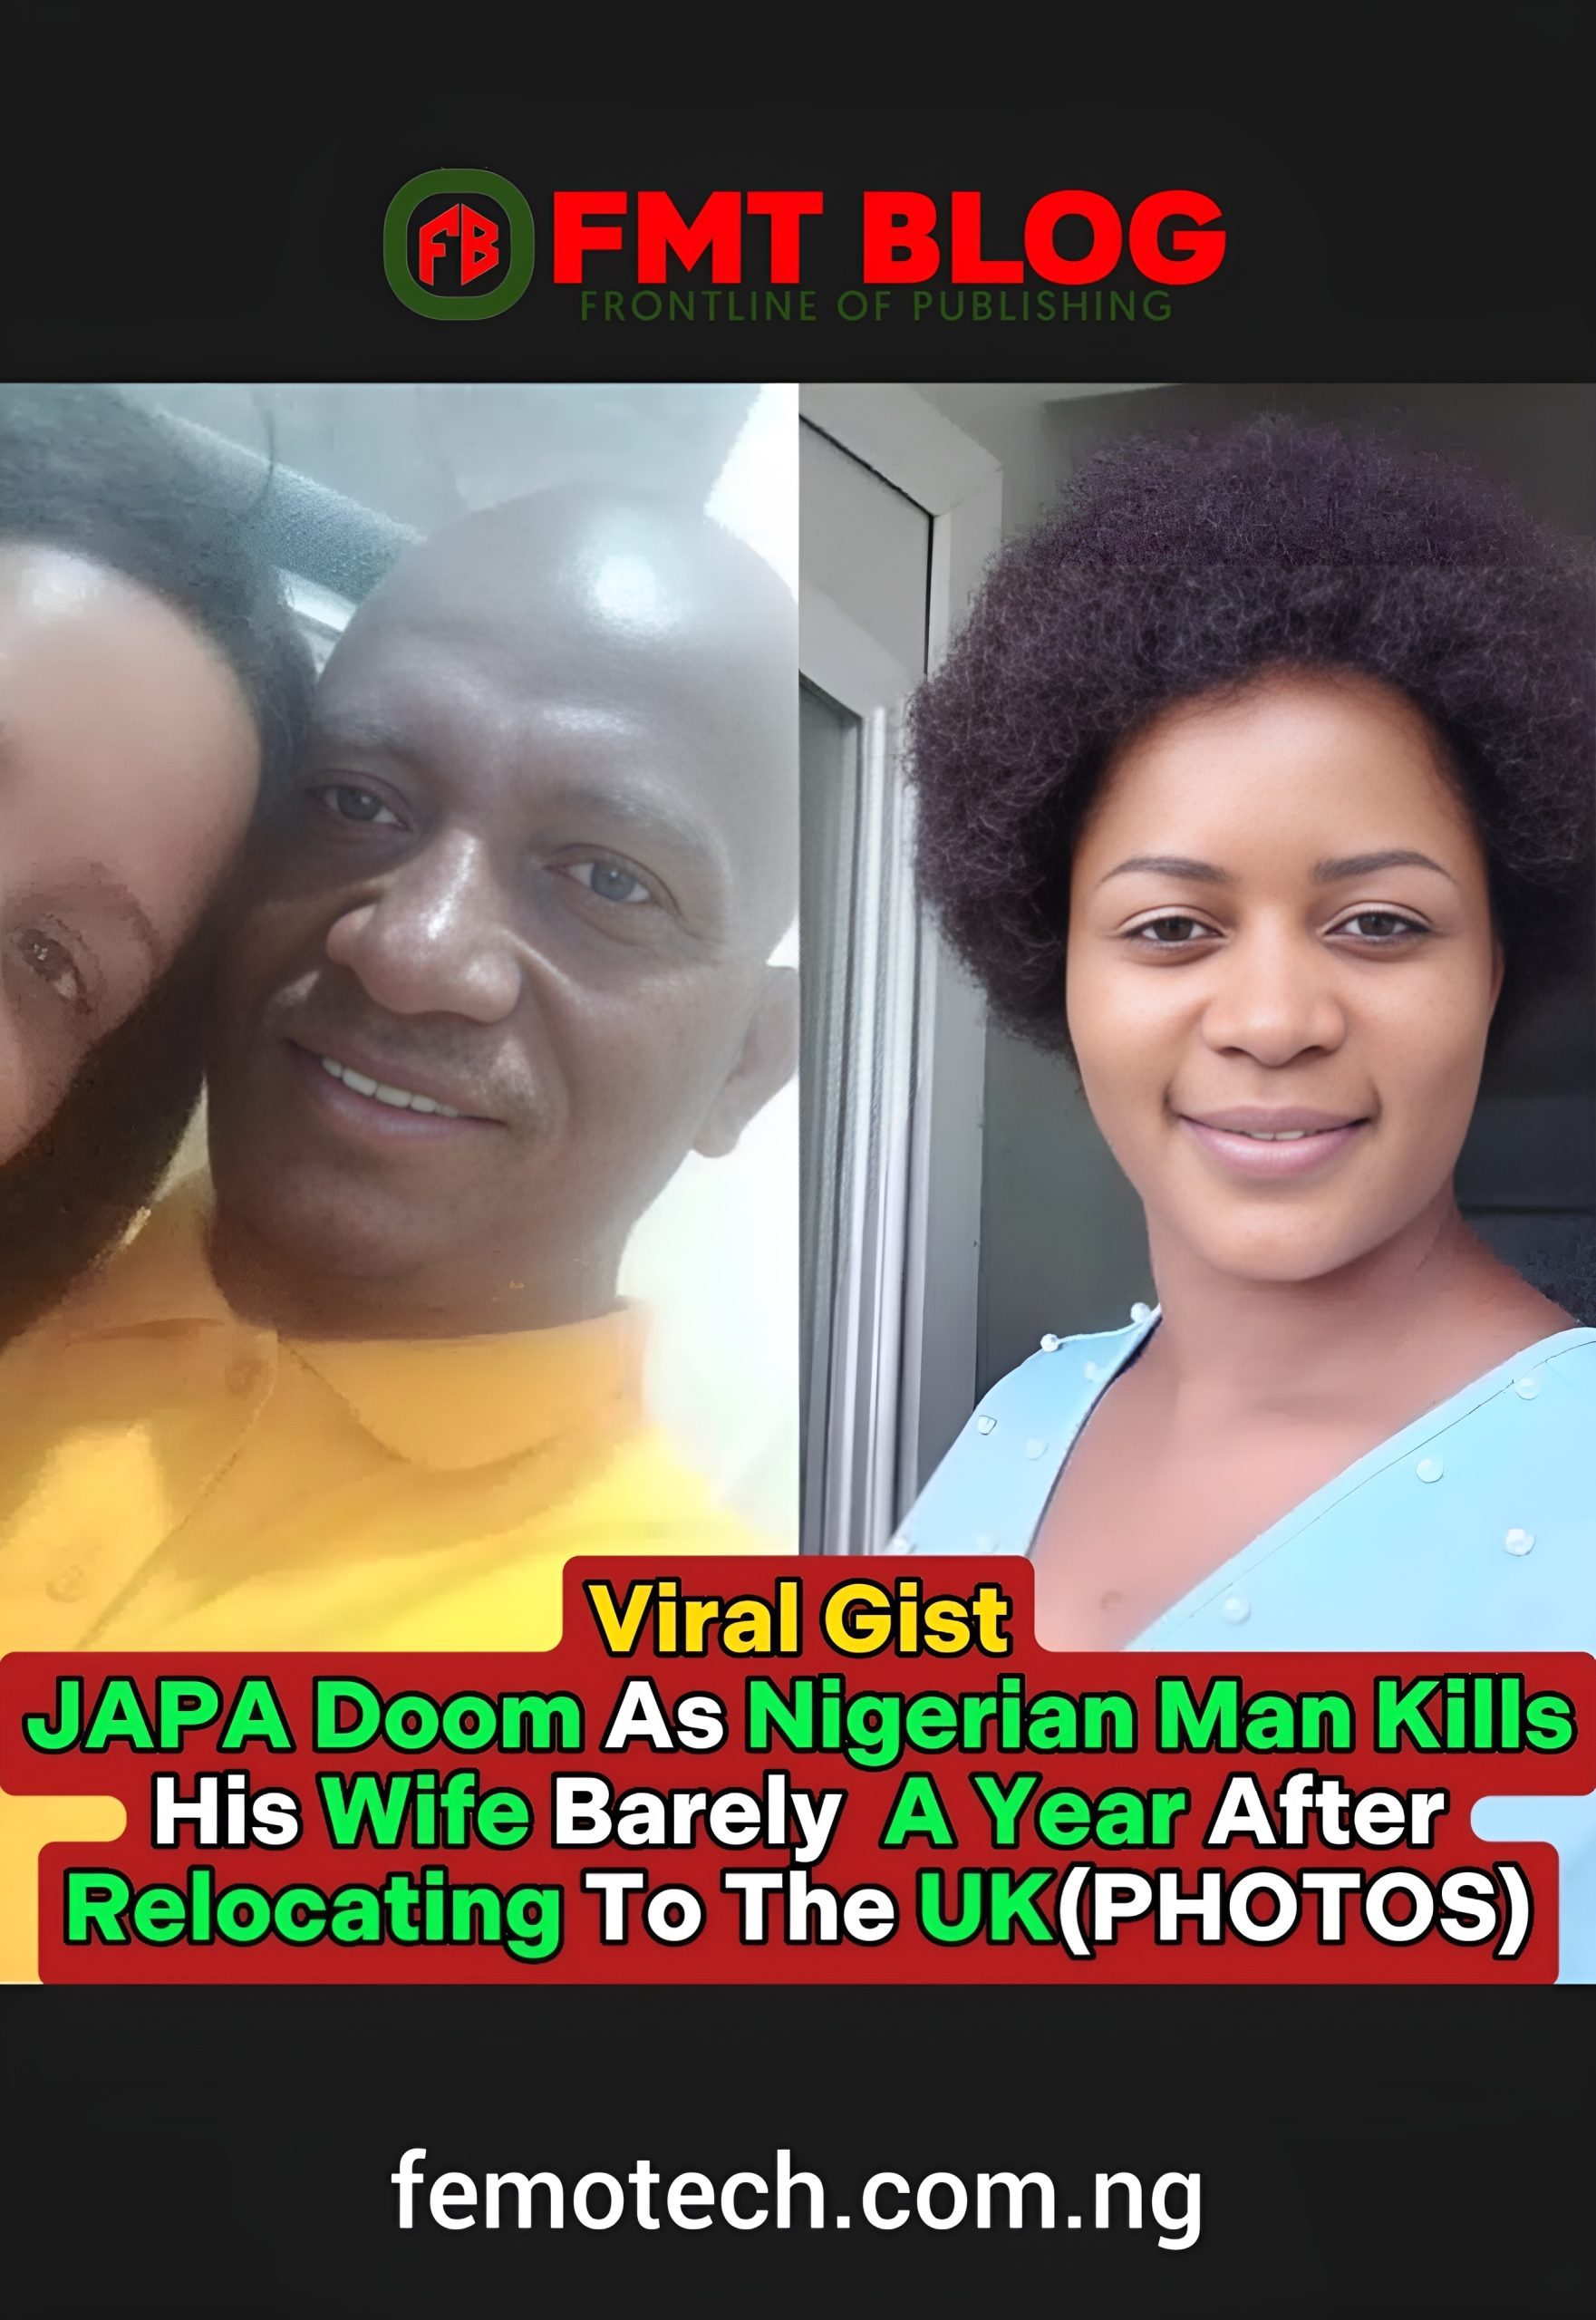 JAPA Doom As Nigerian Man Kills His Wife Barely A Year After Relocating To the UK  (Photos)